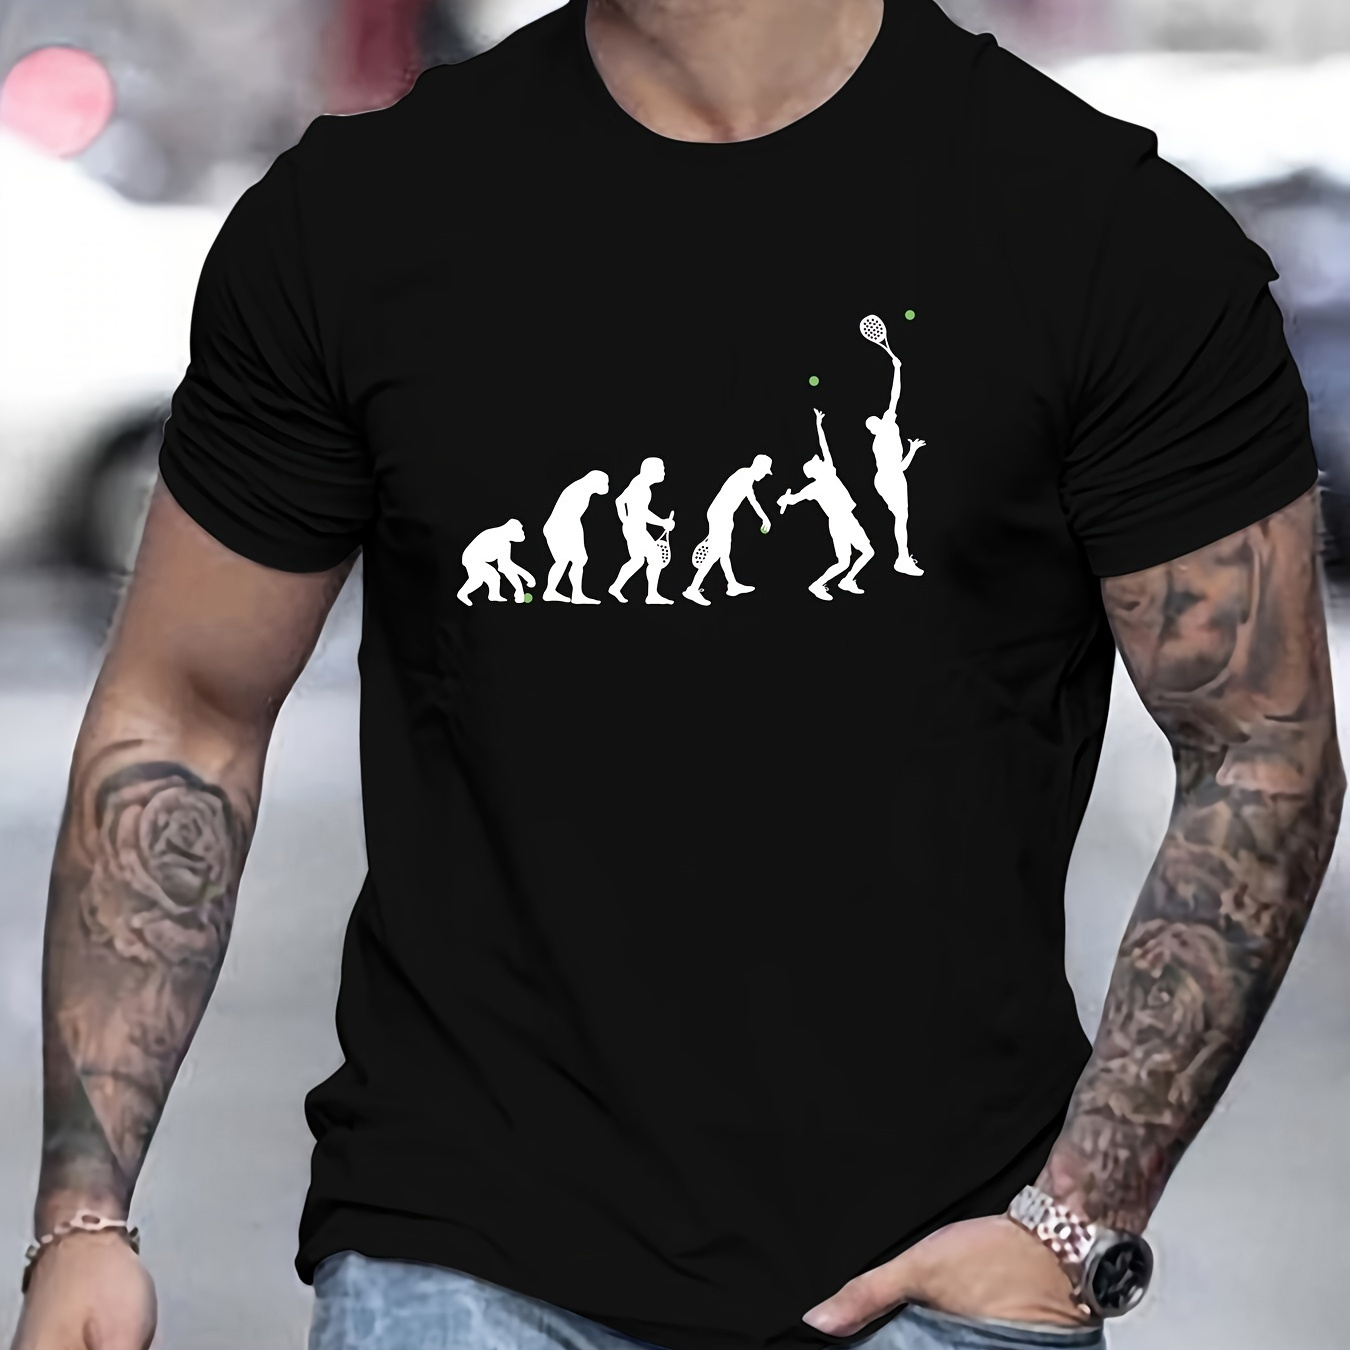 

The Evolution Of Tennis Player Print T Shirt, Tees For Men, Casual Short Sleeve T-shirt For Summer